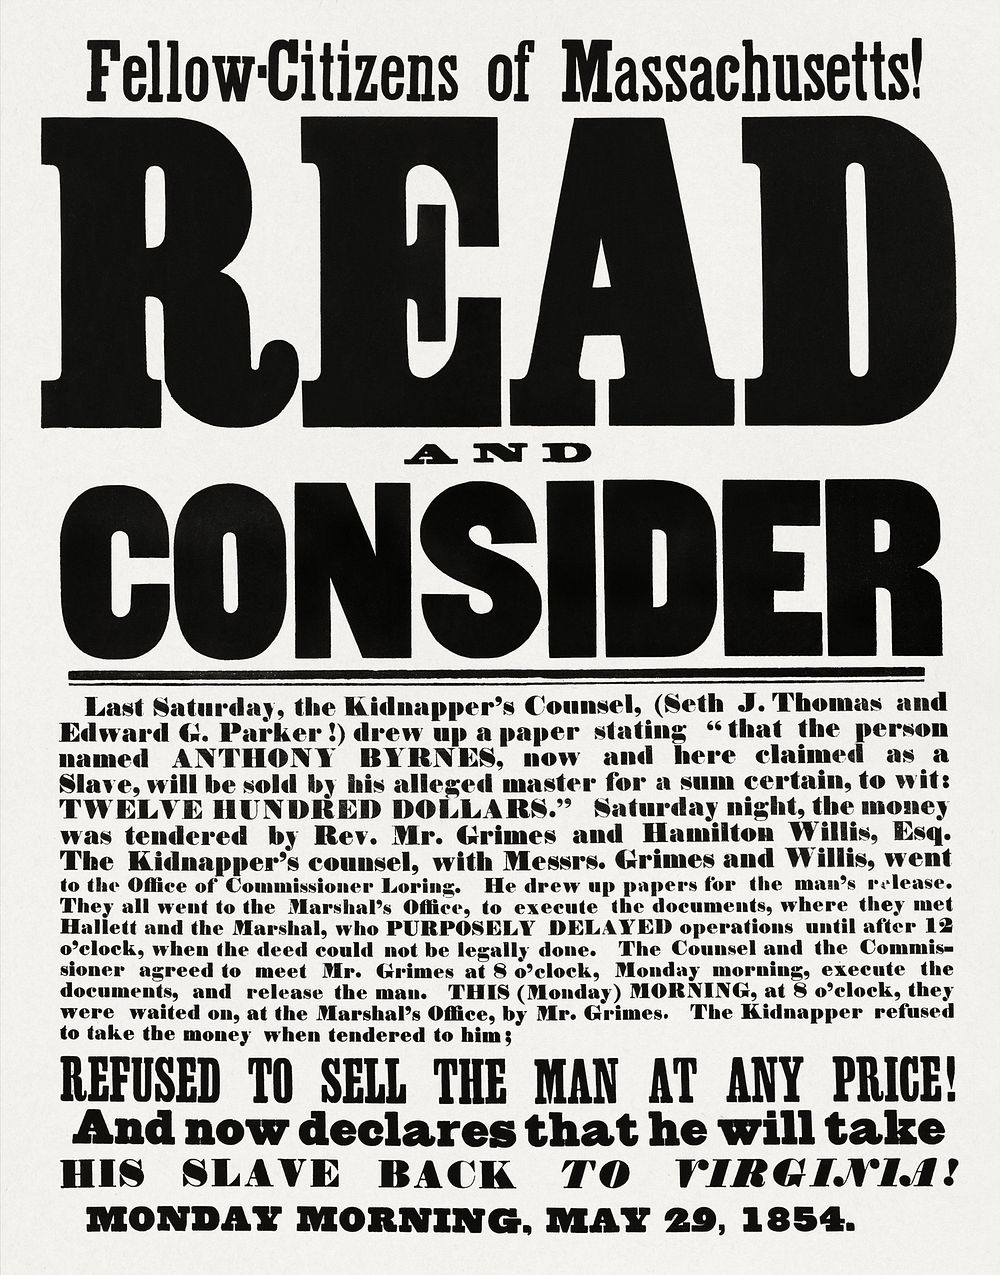 Fellow citizens of Massachusetts! : Read and consider (1854). Original public domain image from Digital Commonwealth.…